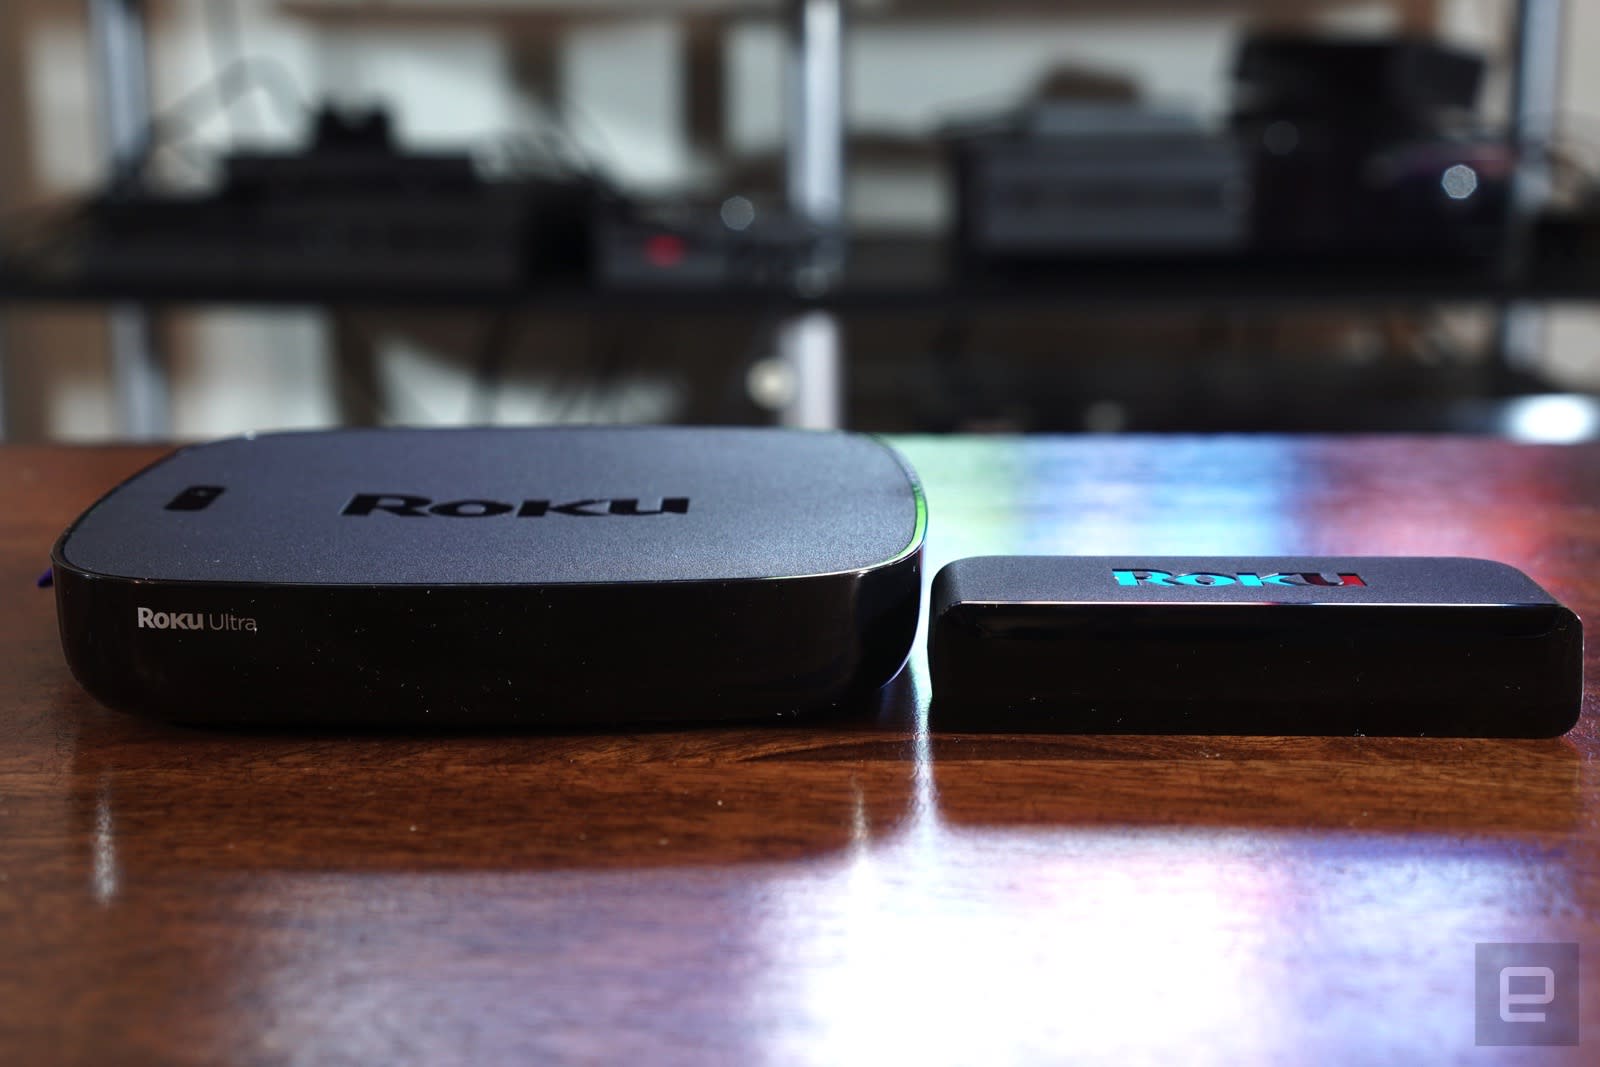 Roku's $30 Express player is more intriguing than its high-end Ultra